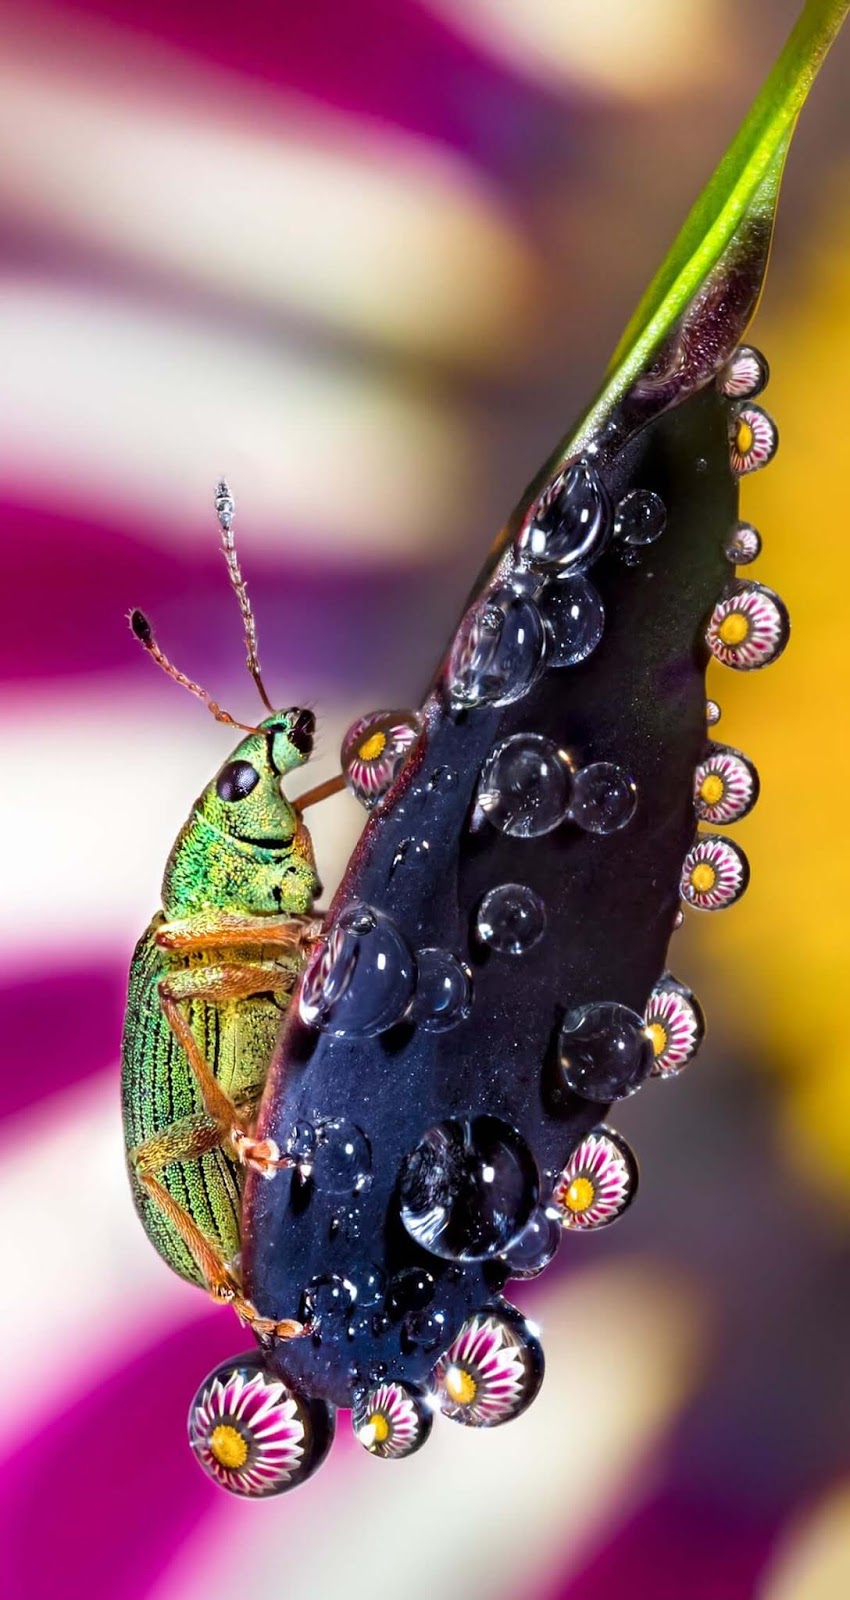 Macro Photographs Of Water Droplets Show Nature's Overlooked Beauty